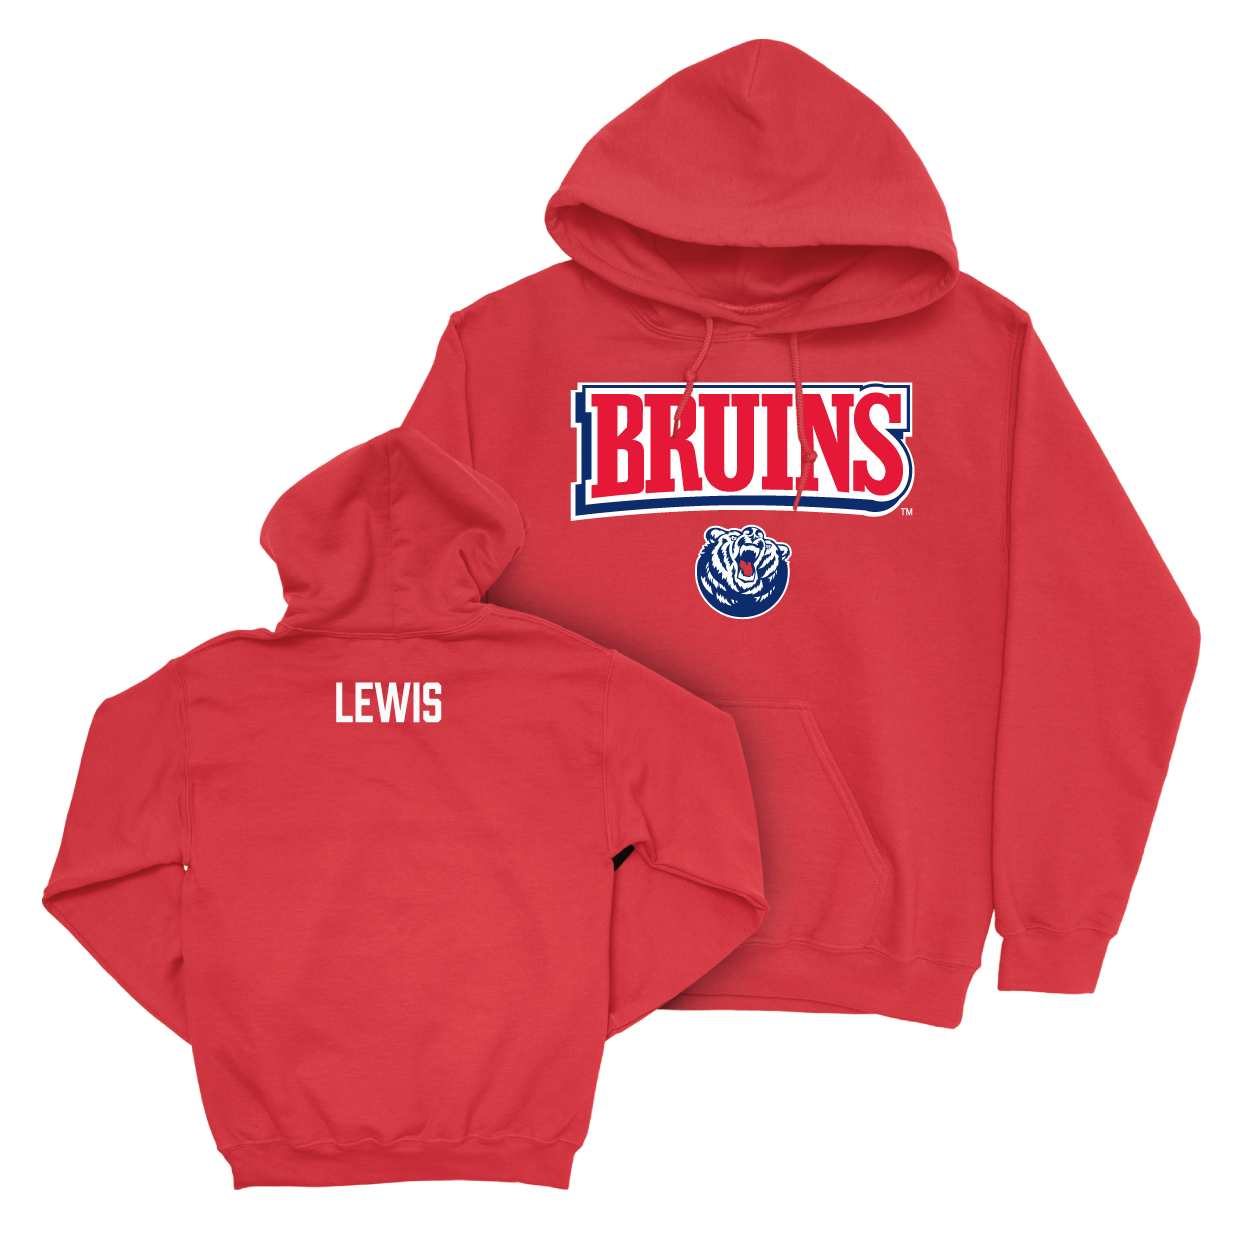 Belmont Track and Field Red Bruins Hoodie Small / Morgan Lewis